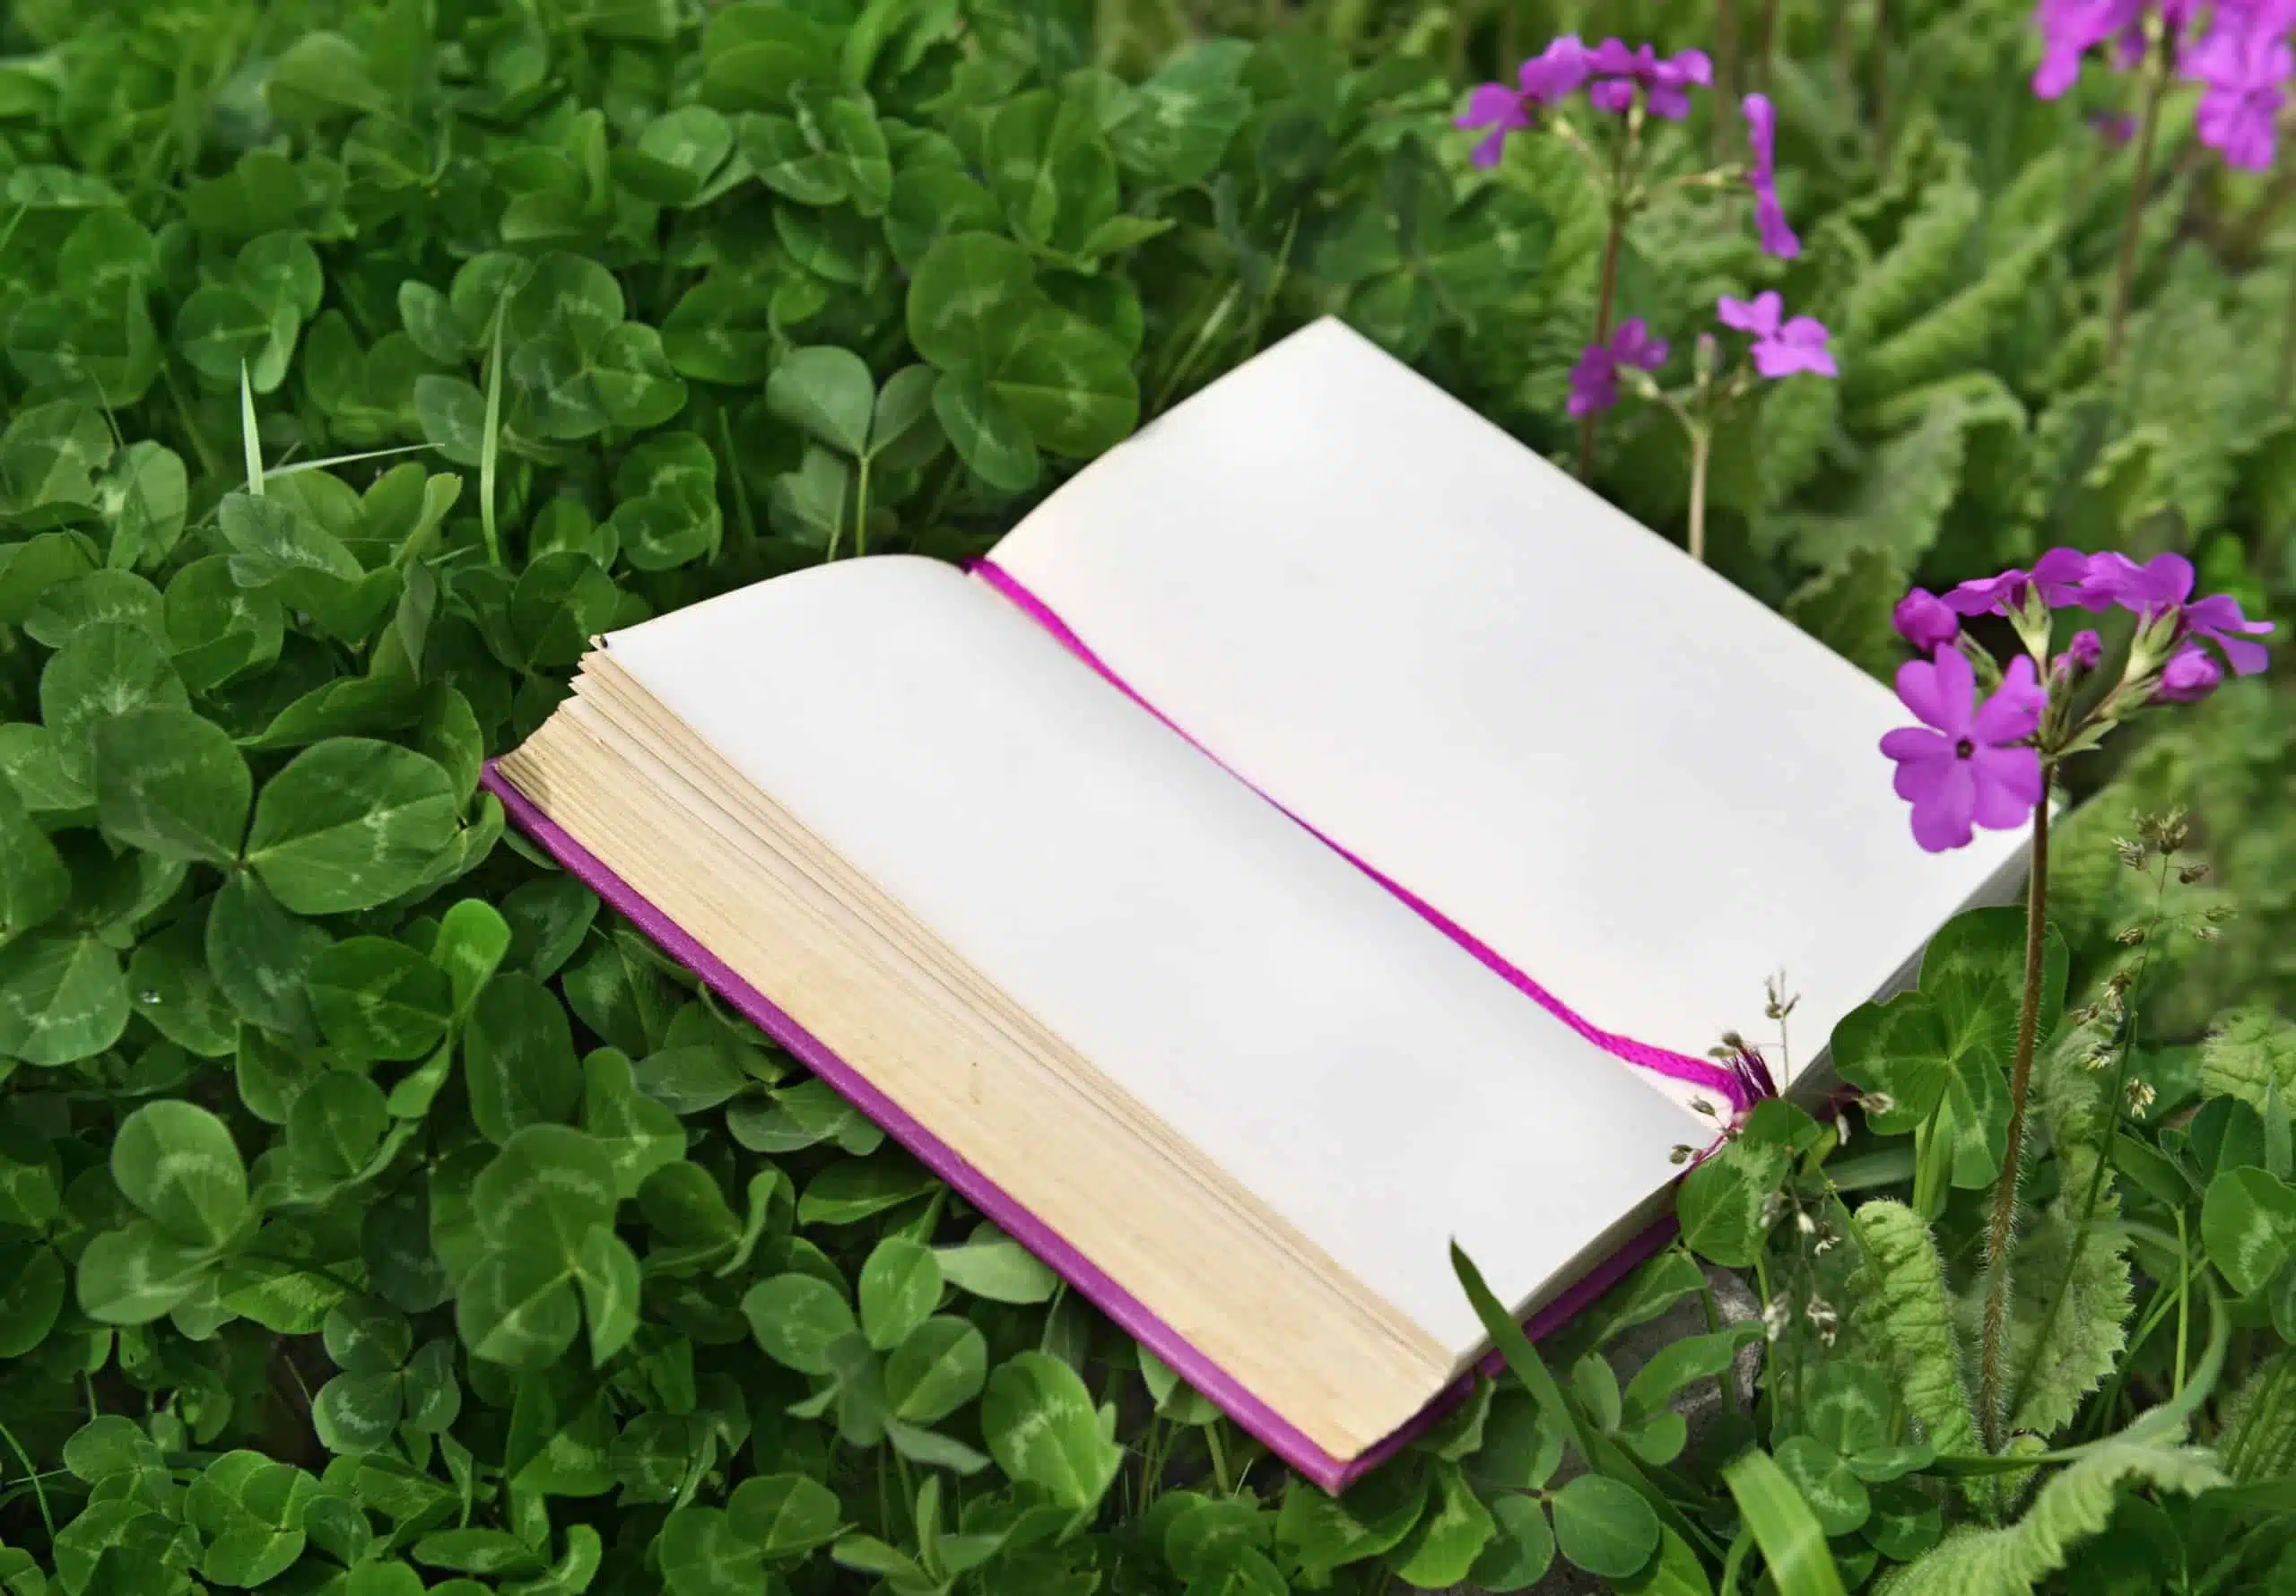 Open notebook laying on a field of clovers and purple flowers.